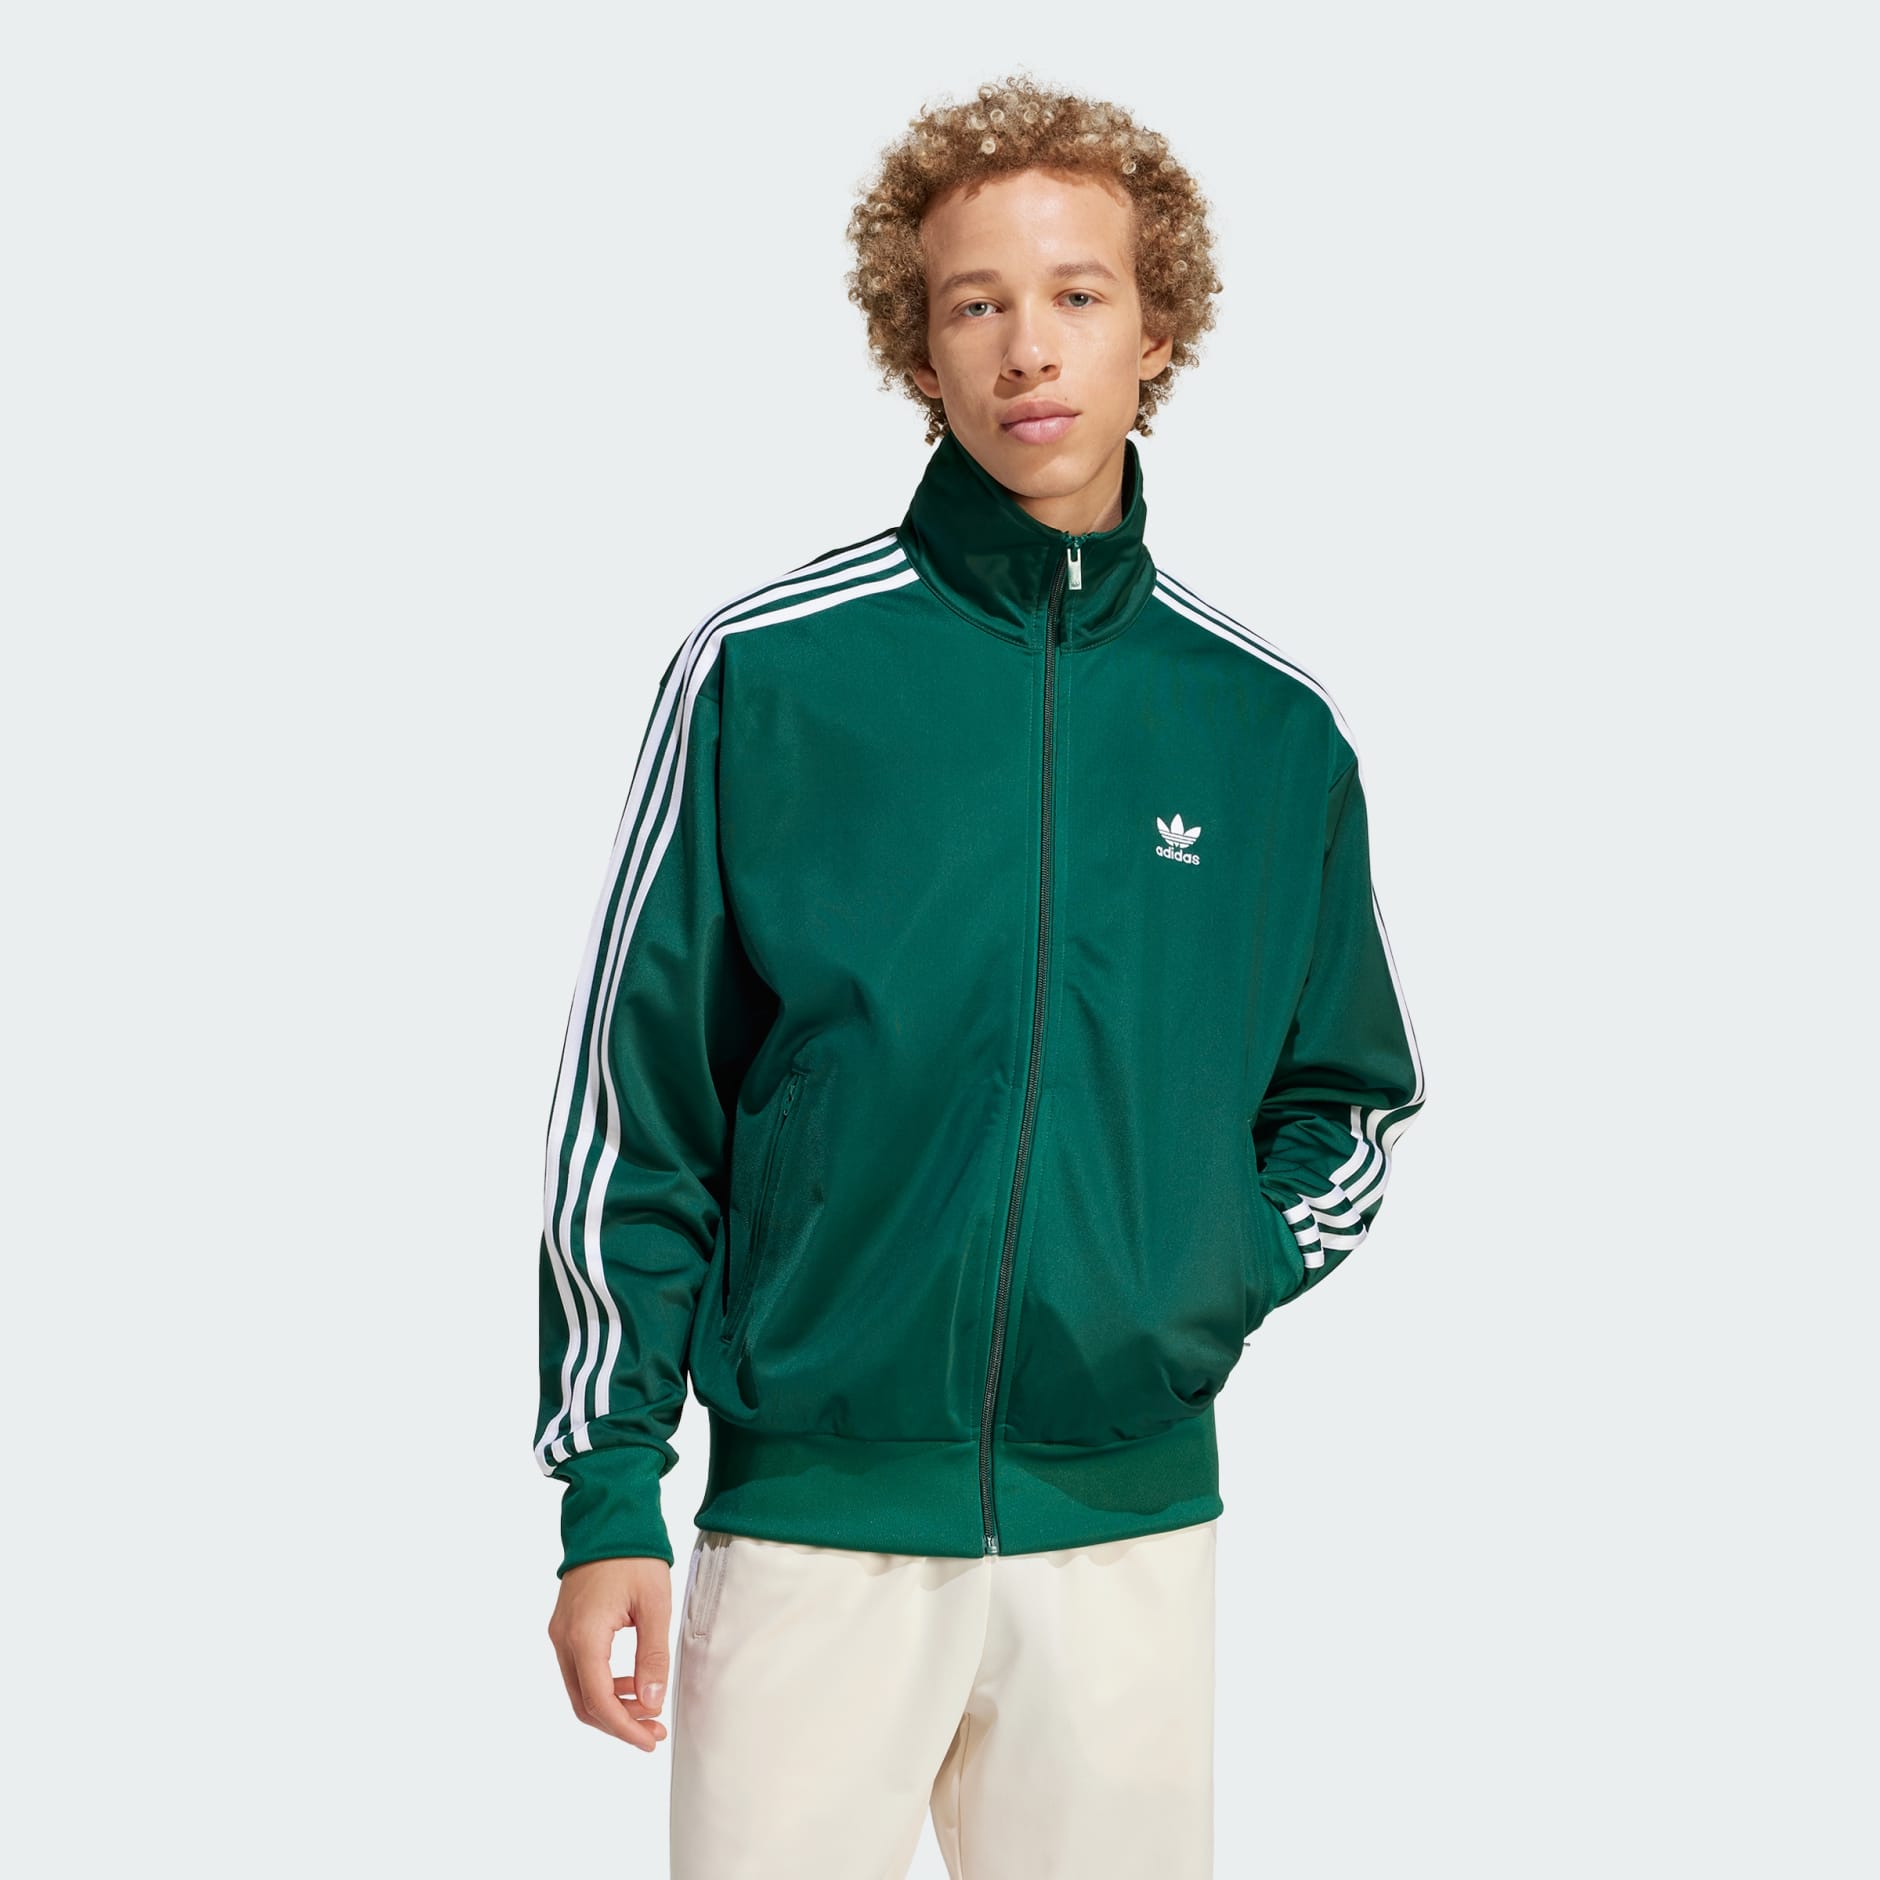 The new edition of the adidas Originals Firebird Tracksuit is the